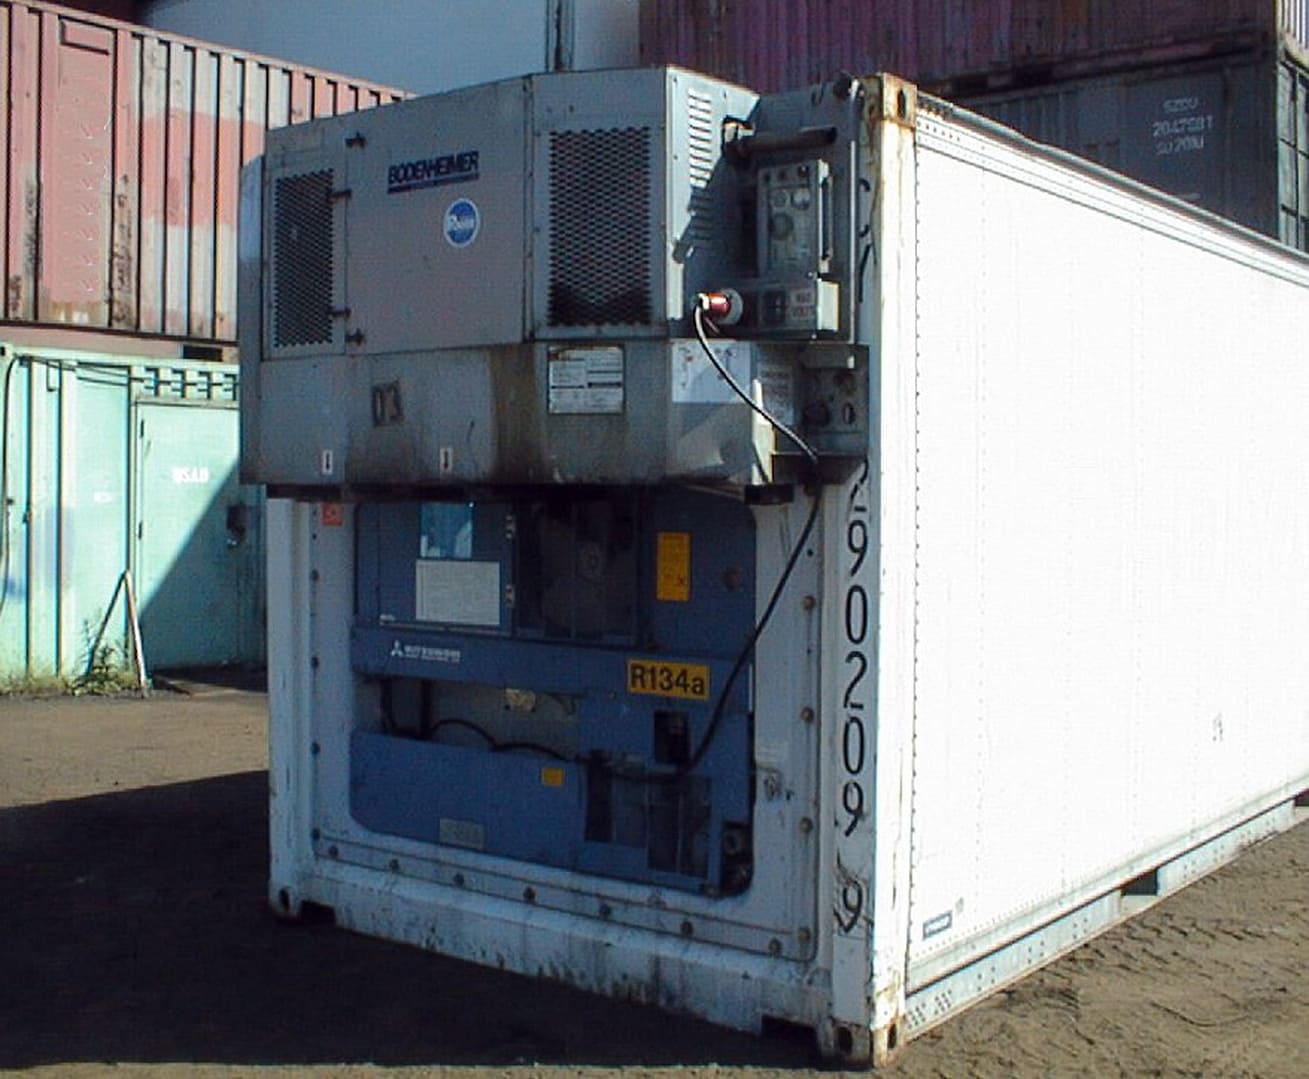 TRS sells TRS rents diesel gensets to power reefer containers while on the road or ocean.